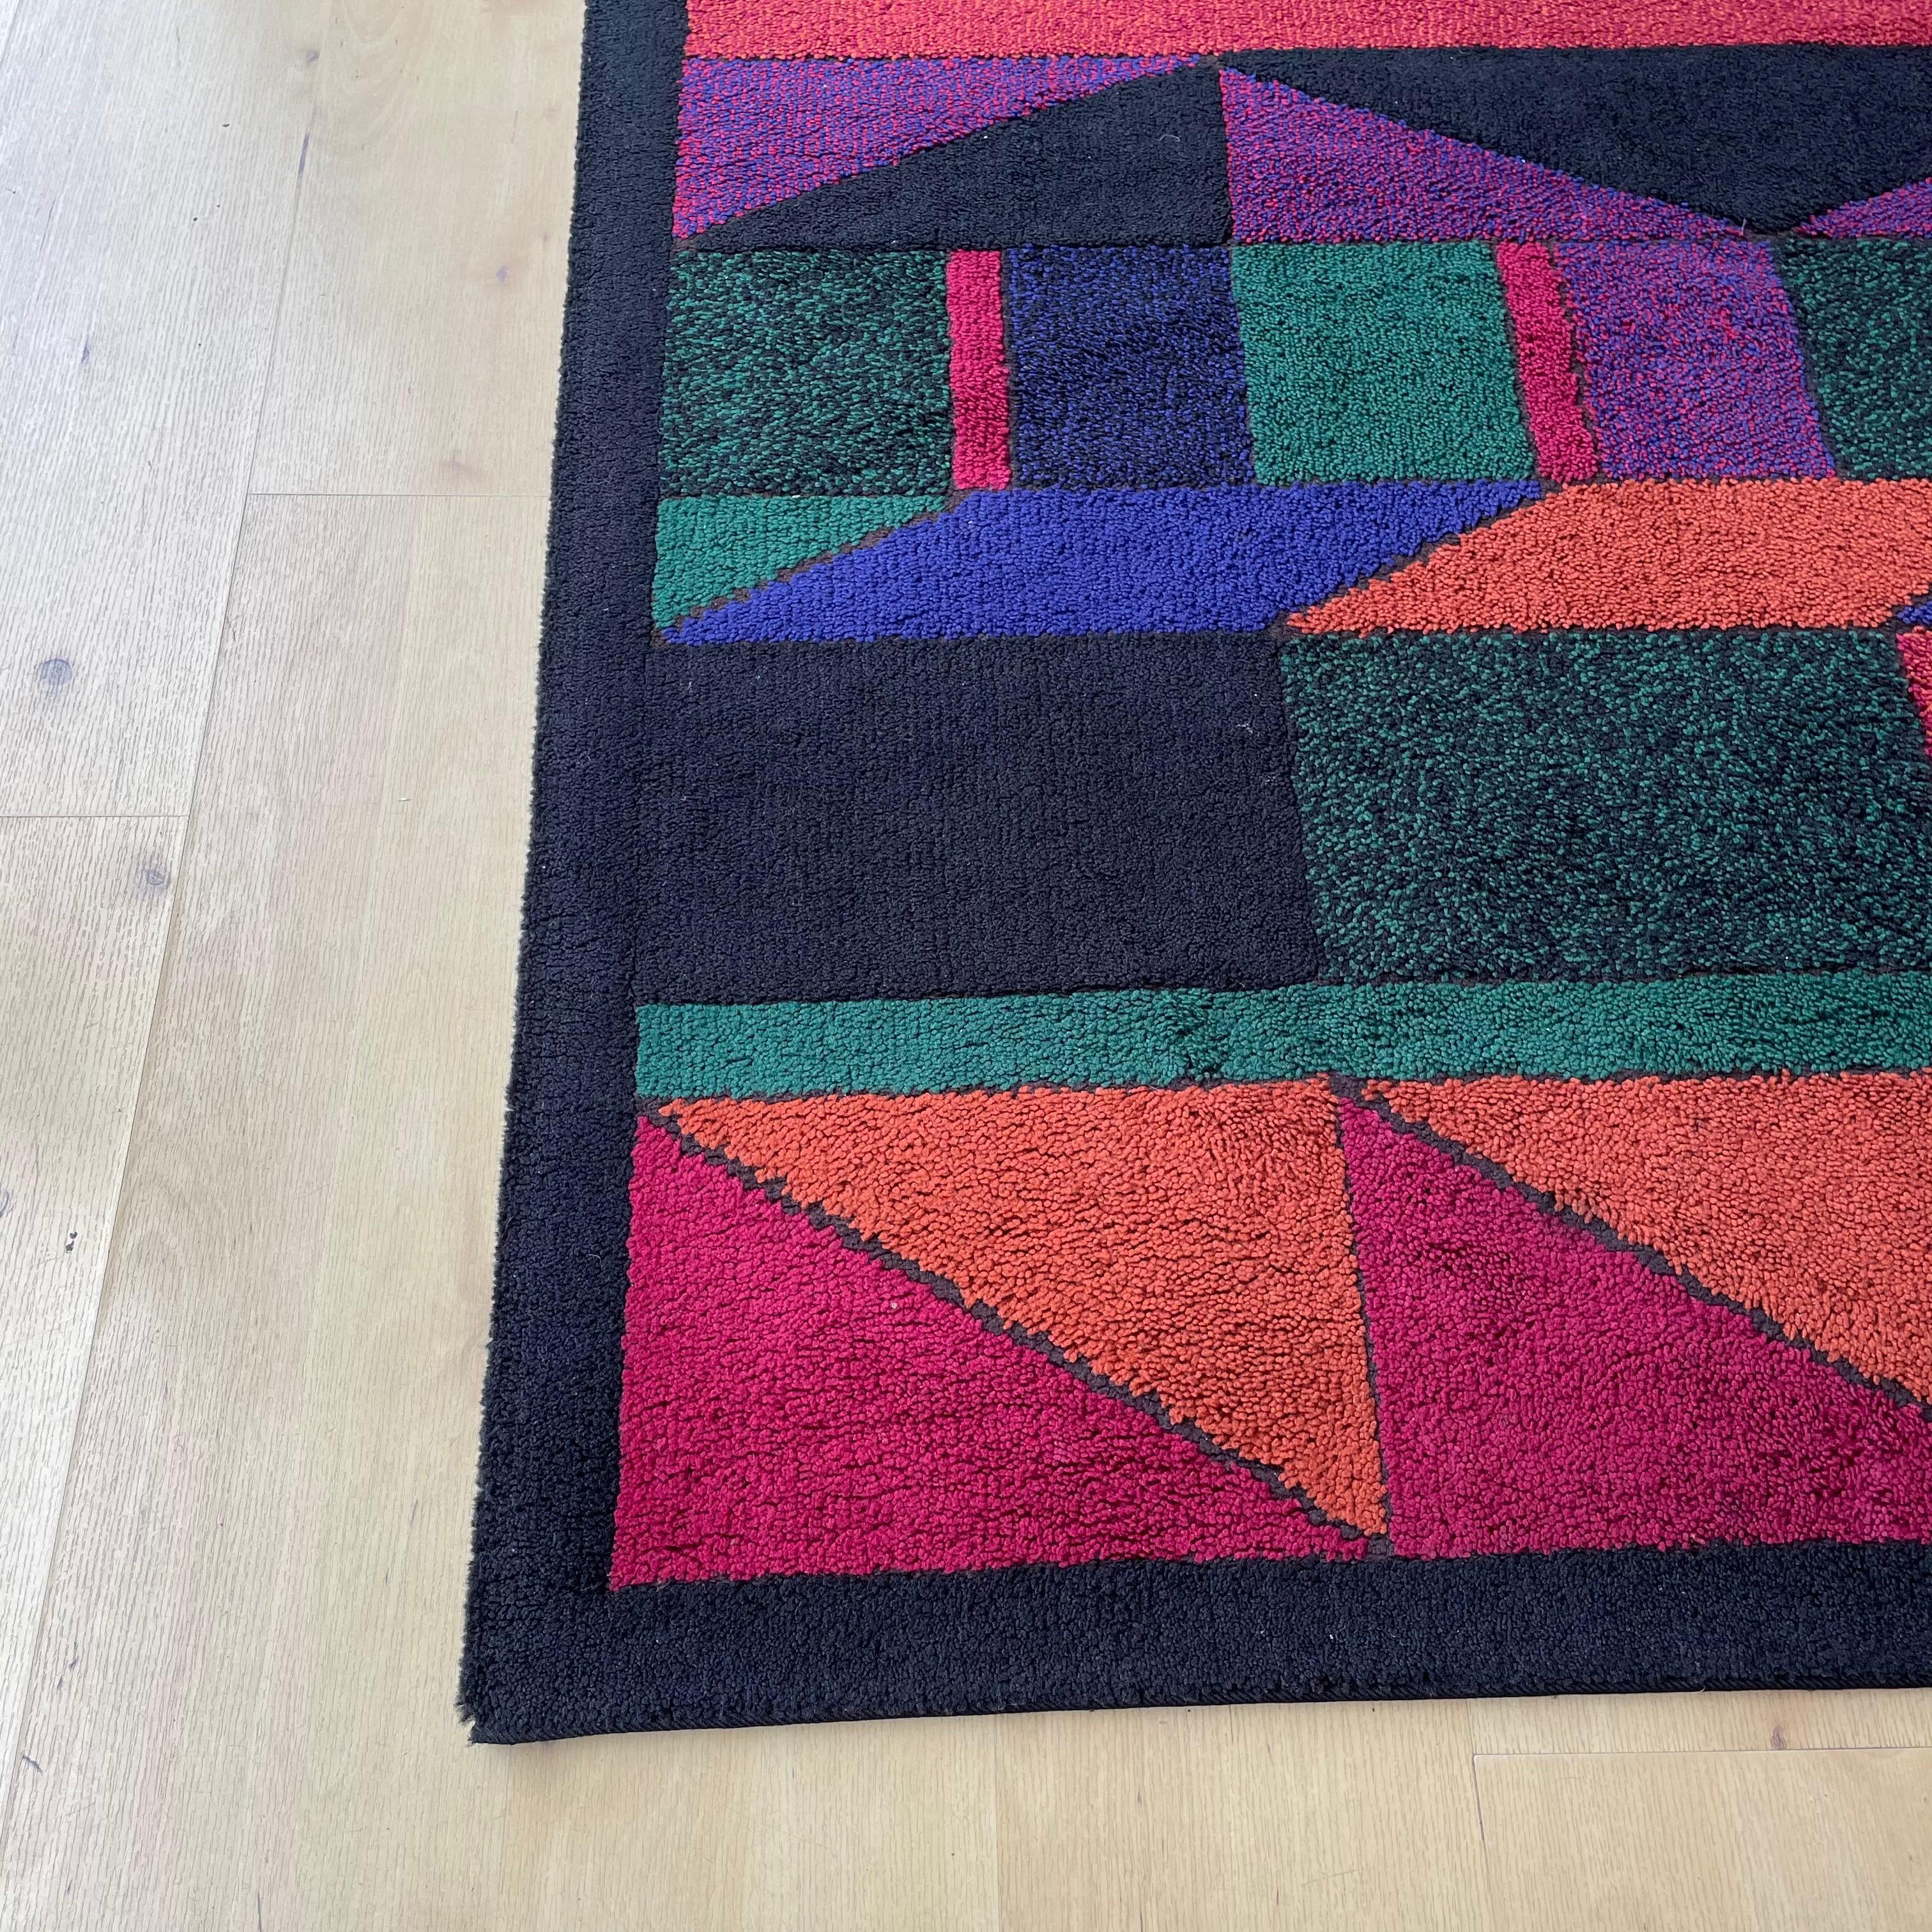 Mid-Century Modern Psychedelic Memphis Style abstract Rug Carpet by Atrium Tefzet, Germany 1980s For Sale